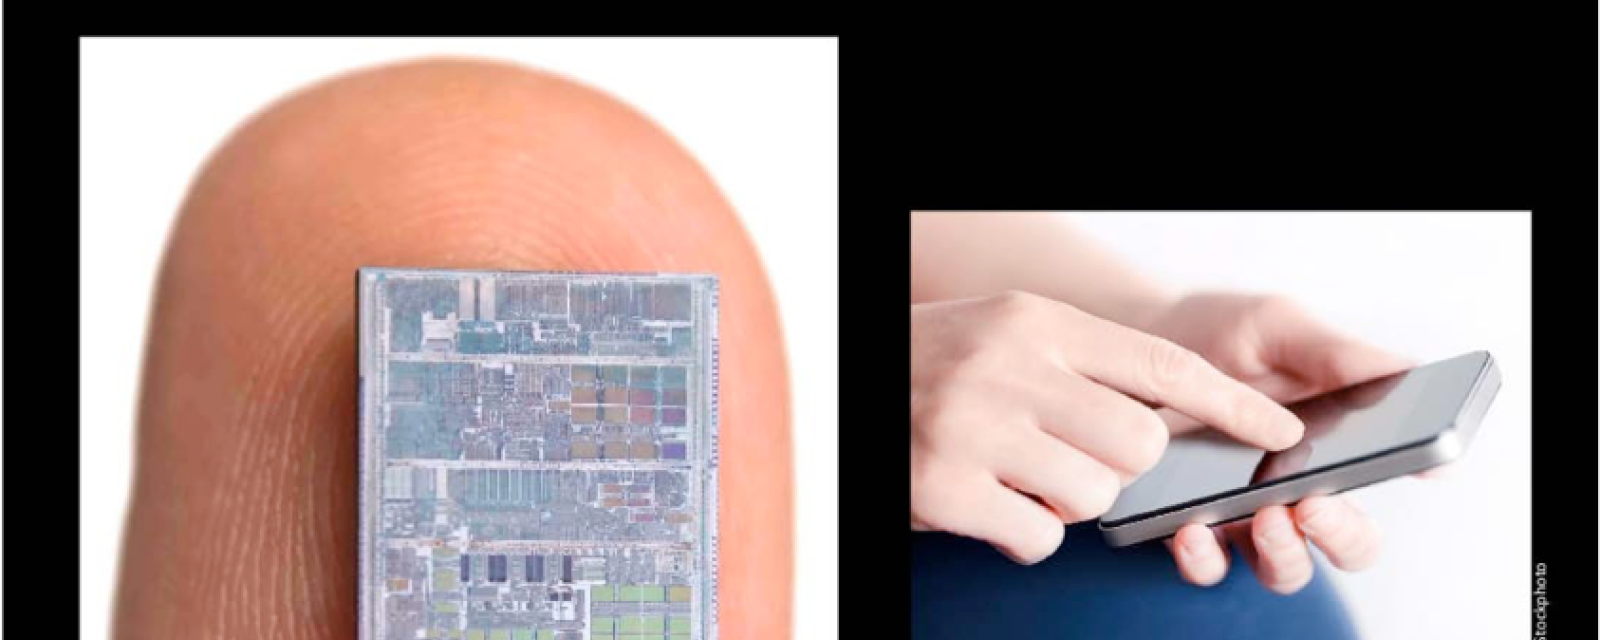 Nano 101 slide presentation showing tiny electronics compared to a finger